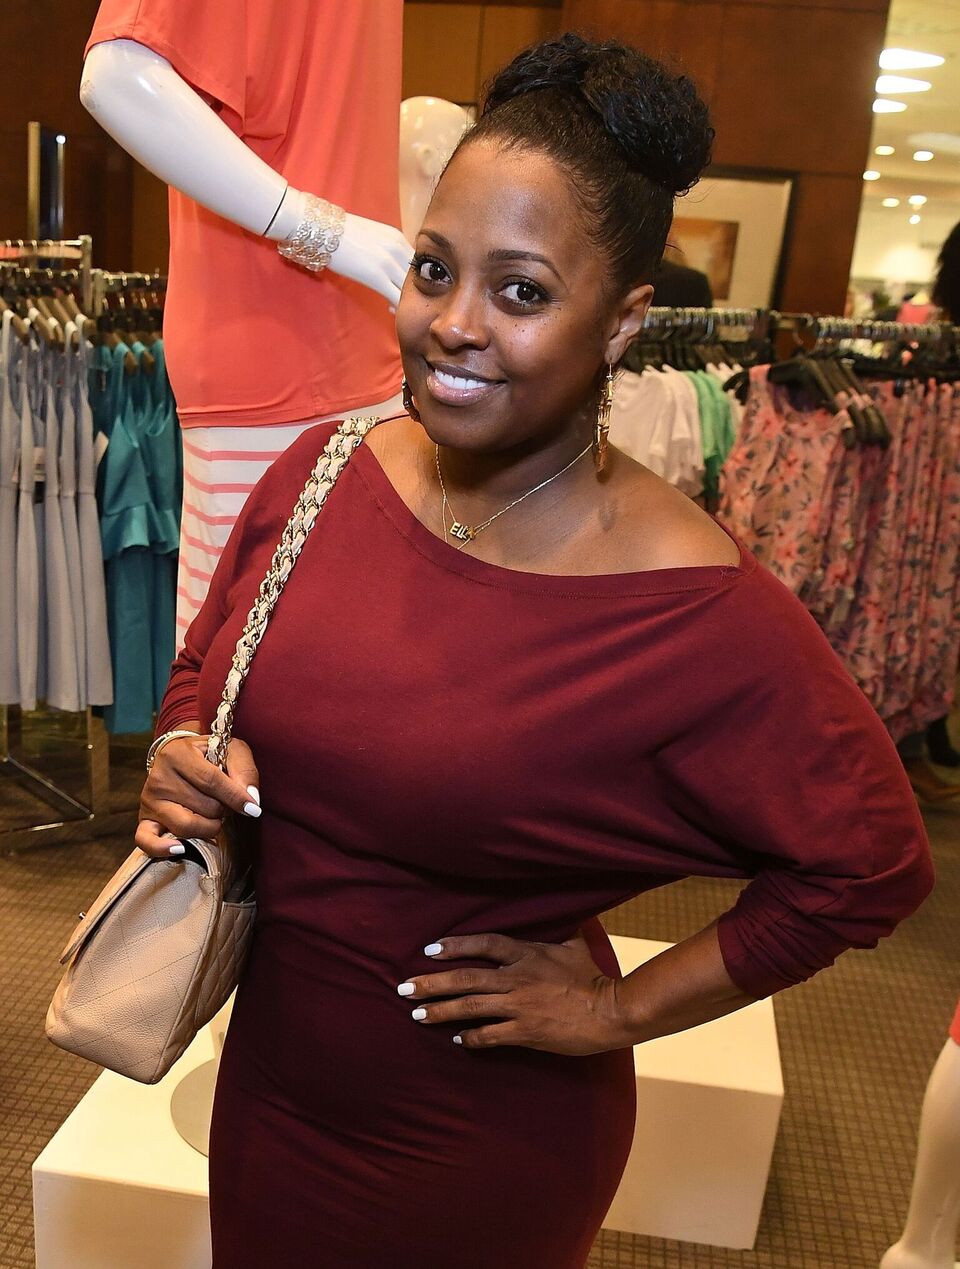 Keisha Knight Pulliam attend "Girls' Night Out: Tracy Nicole Spring Collection Showcase" at Belk Phipps Plaza on March 9, 2017 in Atlanta, Georgia | Photo: Getty Images